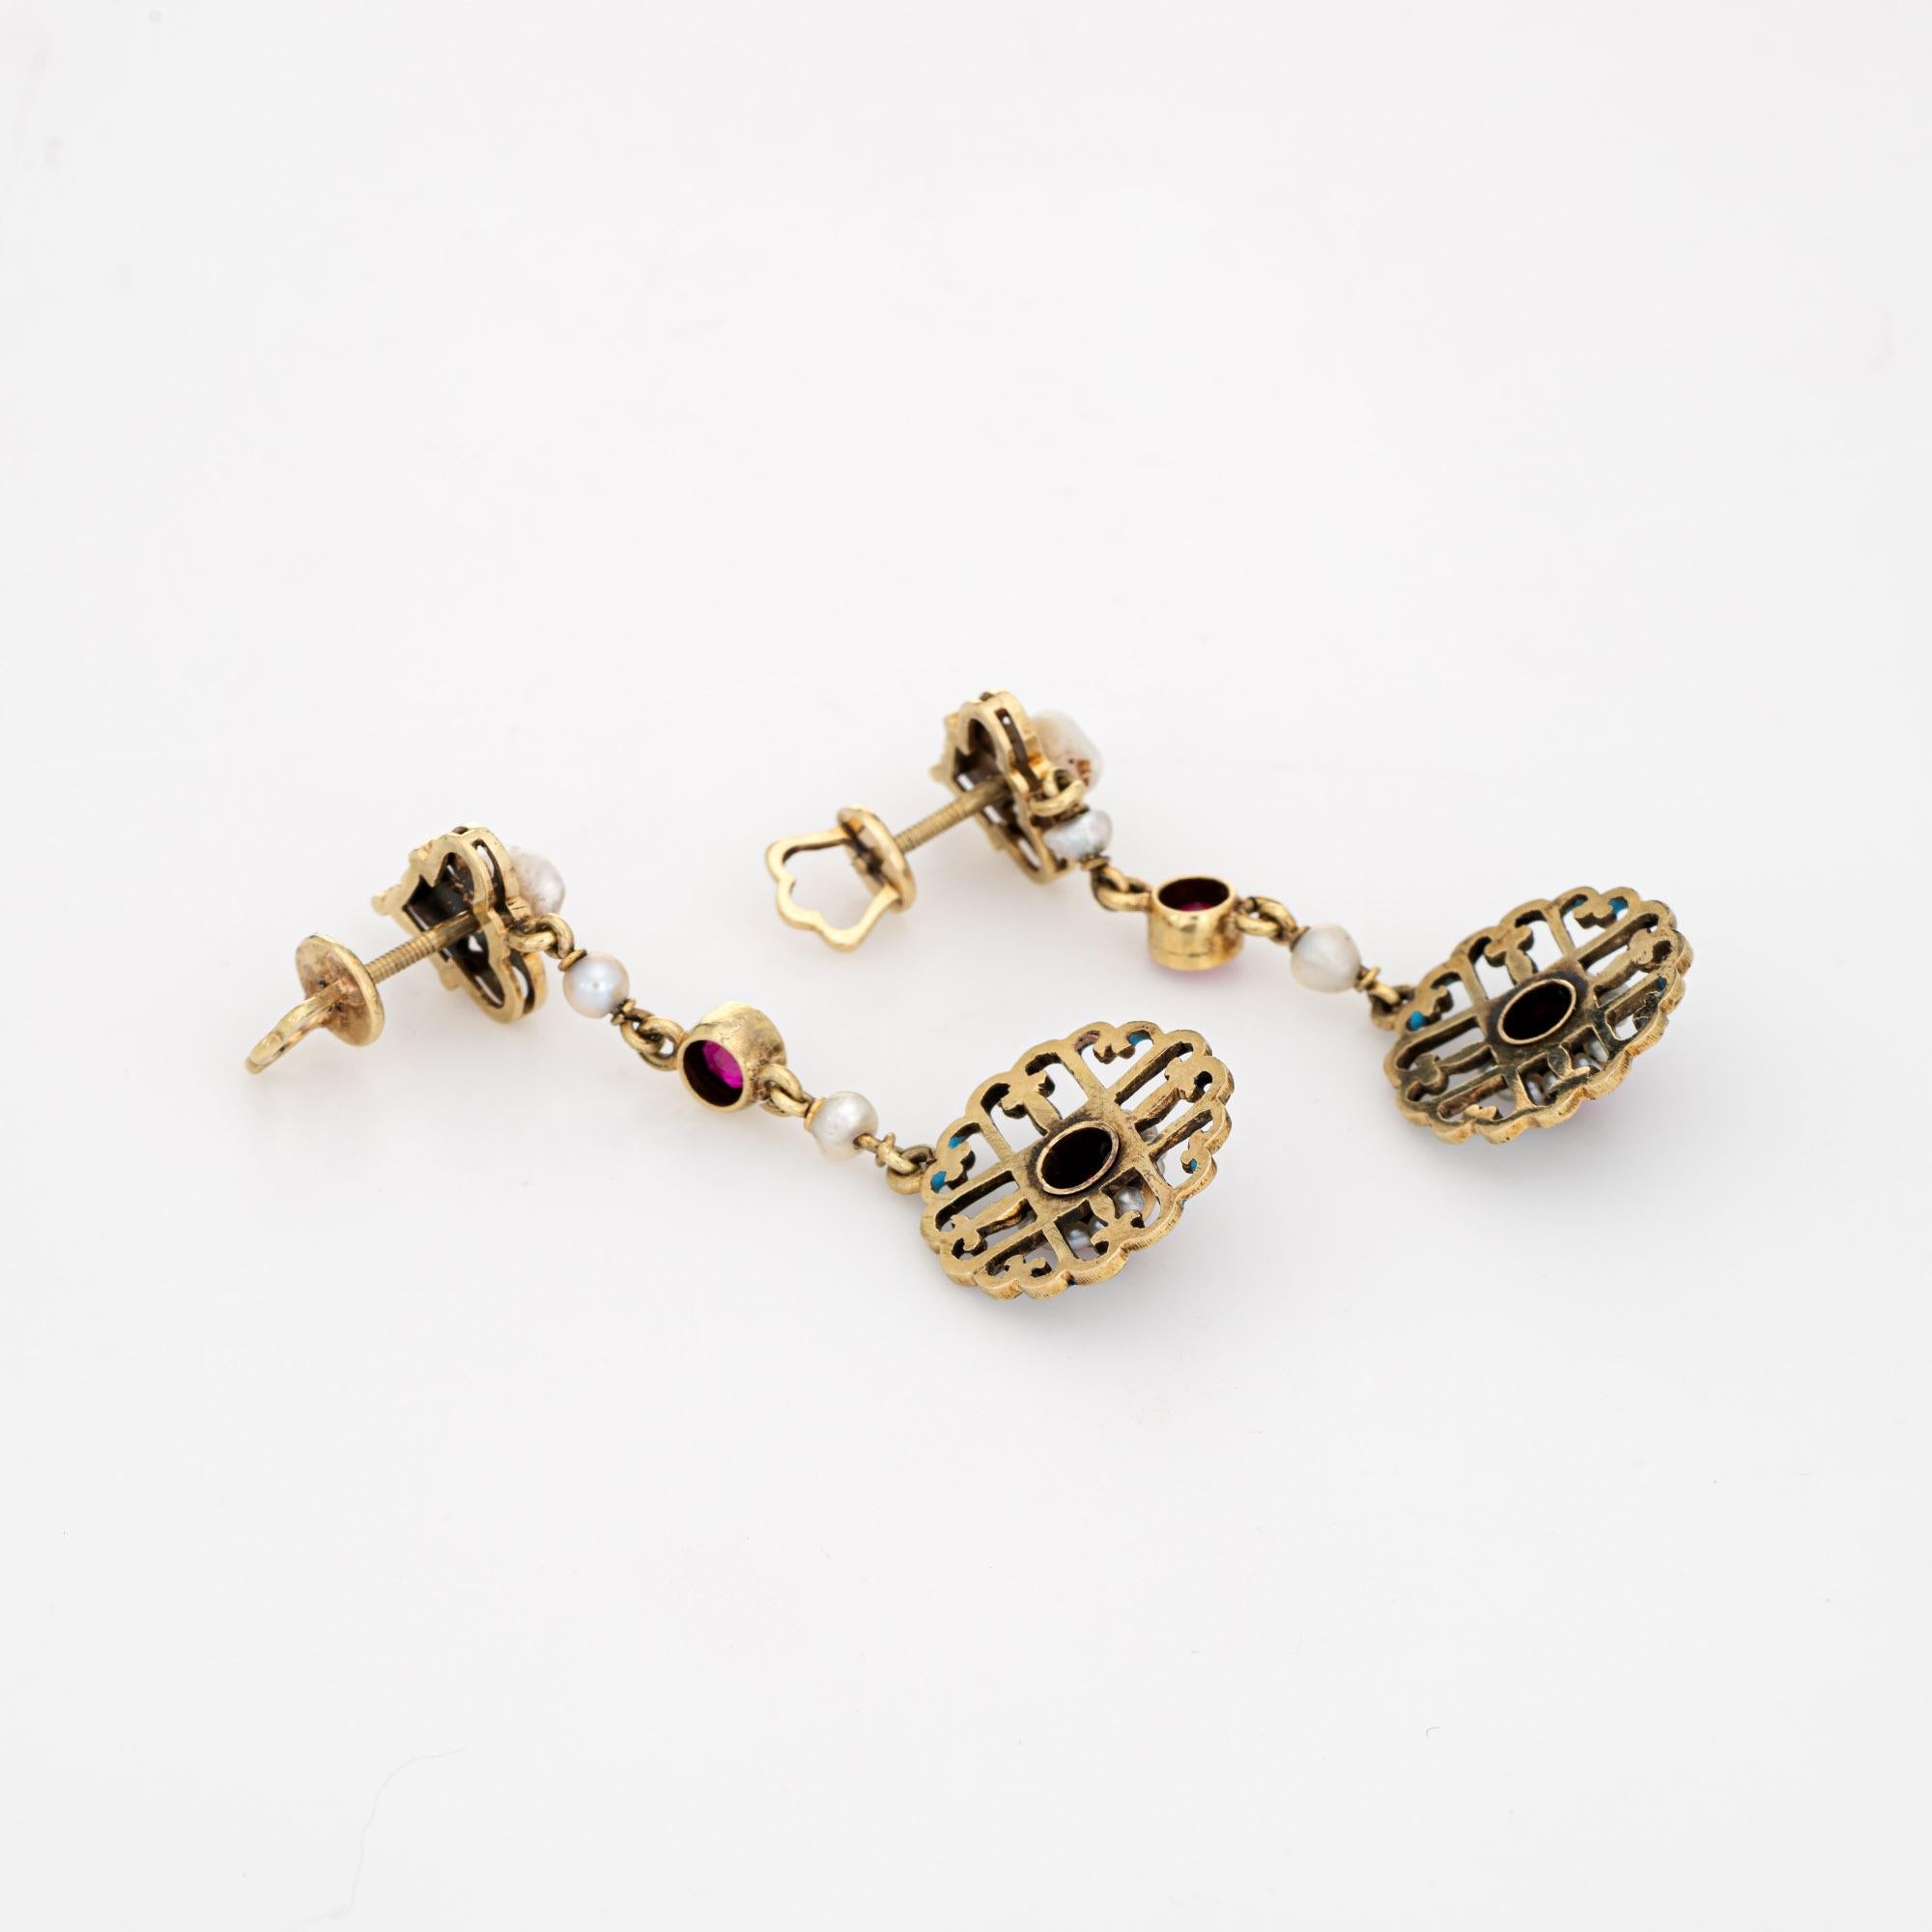 Elegant and finely detailed Edwardian era enamel earrings (circa 1900s to 1910s), crafted in 14 karat yellow gold.  

Created rubies graduate in size from 3.5mm to 4mm (in very good condition and free of cracks or chips). Small natural 1mm seed